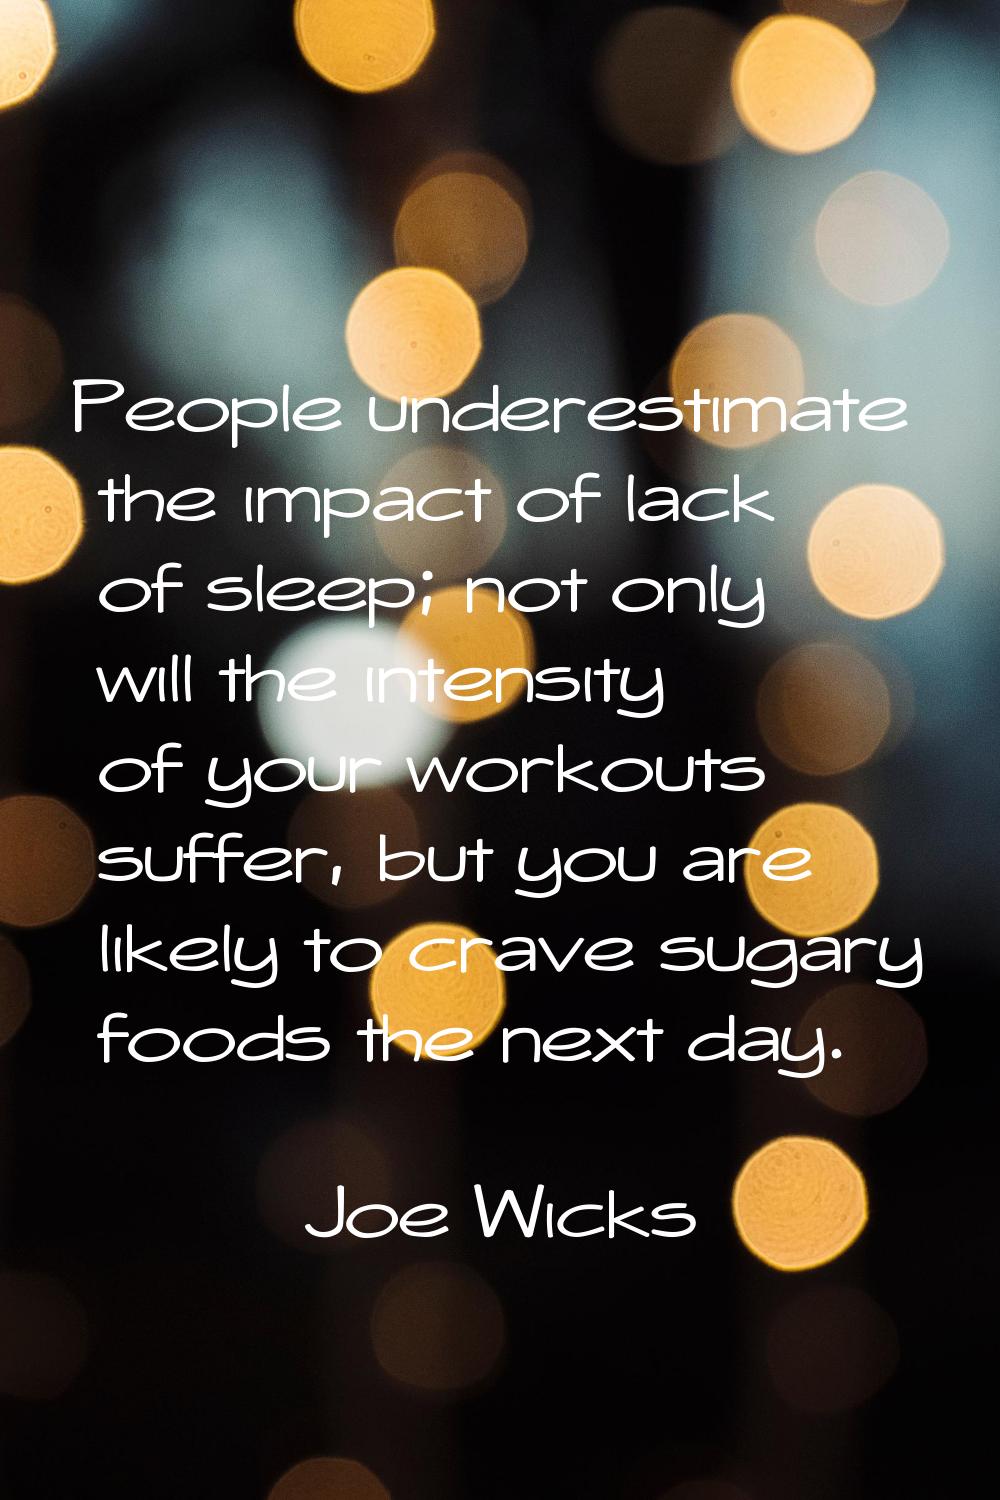 People underestimate the impact of lack of sleep; not only will the intensity of your workouts suff